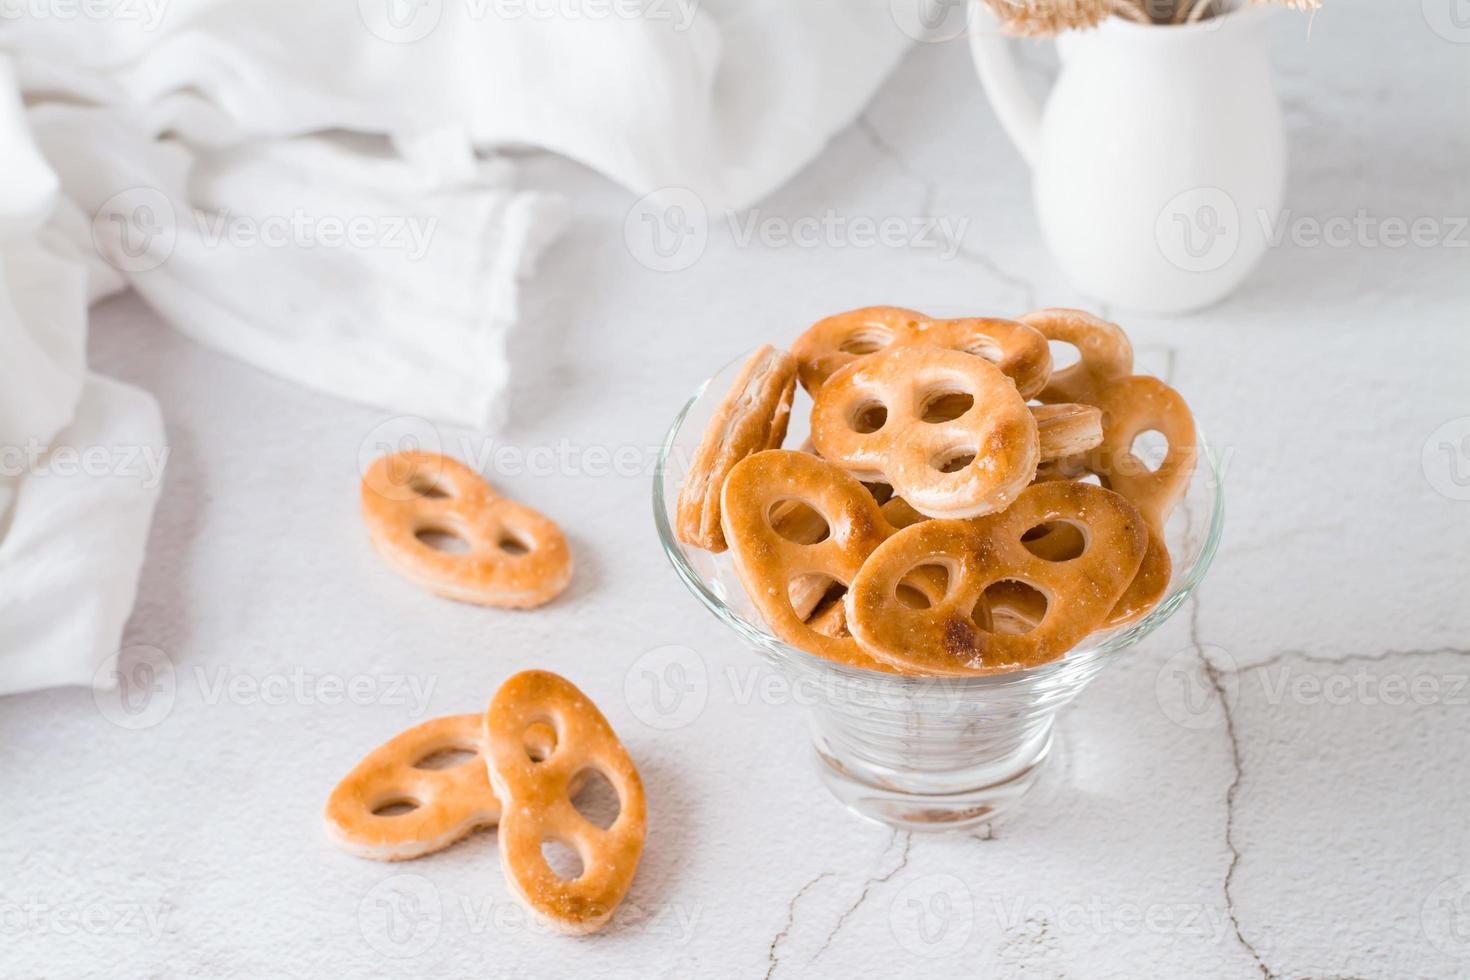 Bavarian pretzels in a glass bowl on the table. Snack for fast food. Close-up photo